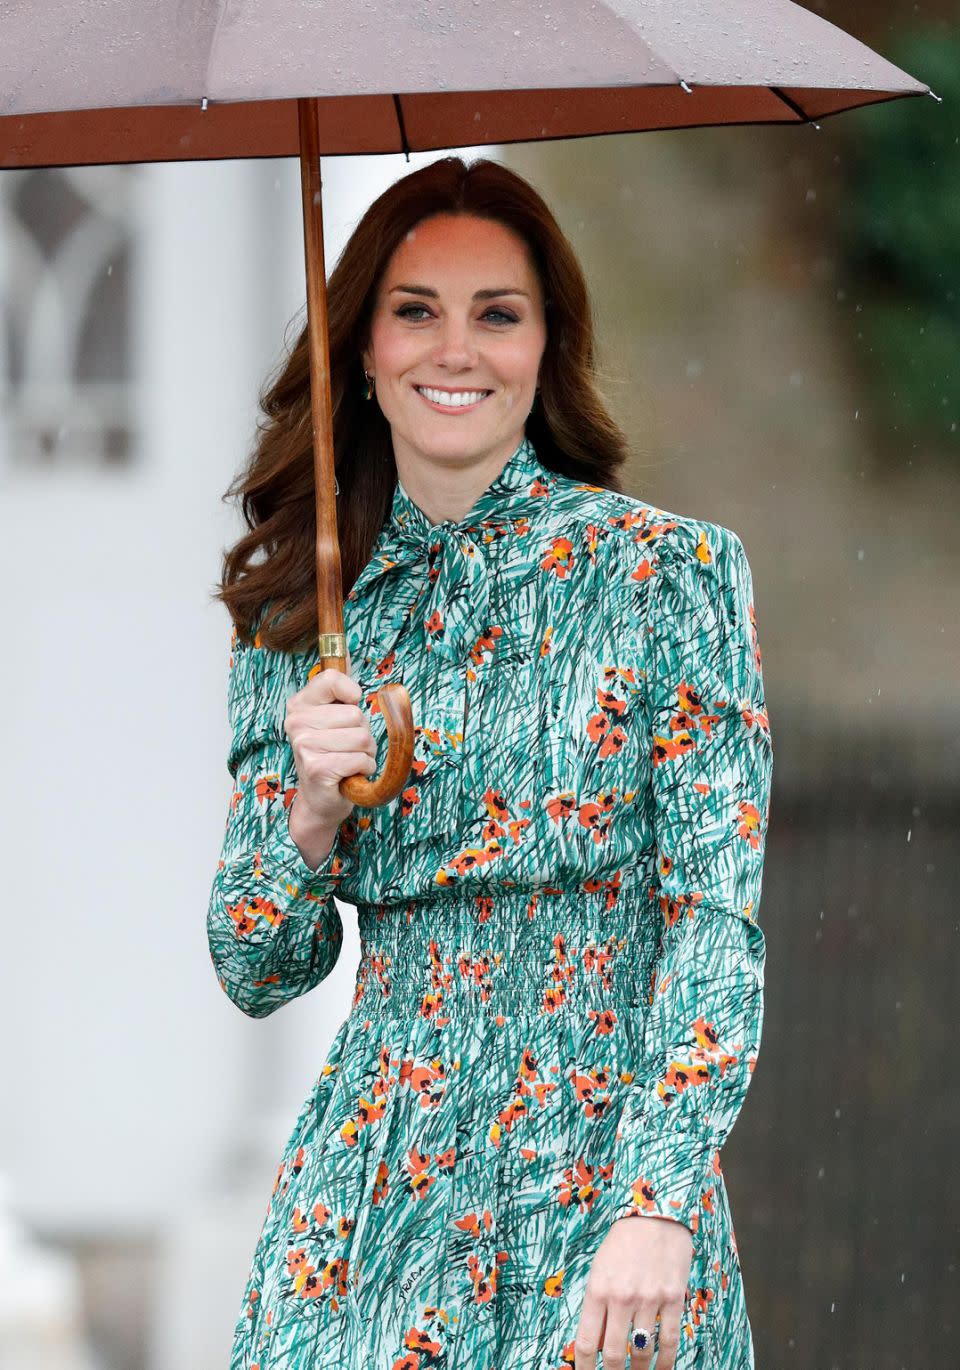 The Duchess was in high spirits and showing no signs of pregnancy in a recent public appearance. Source: Getty